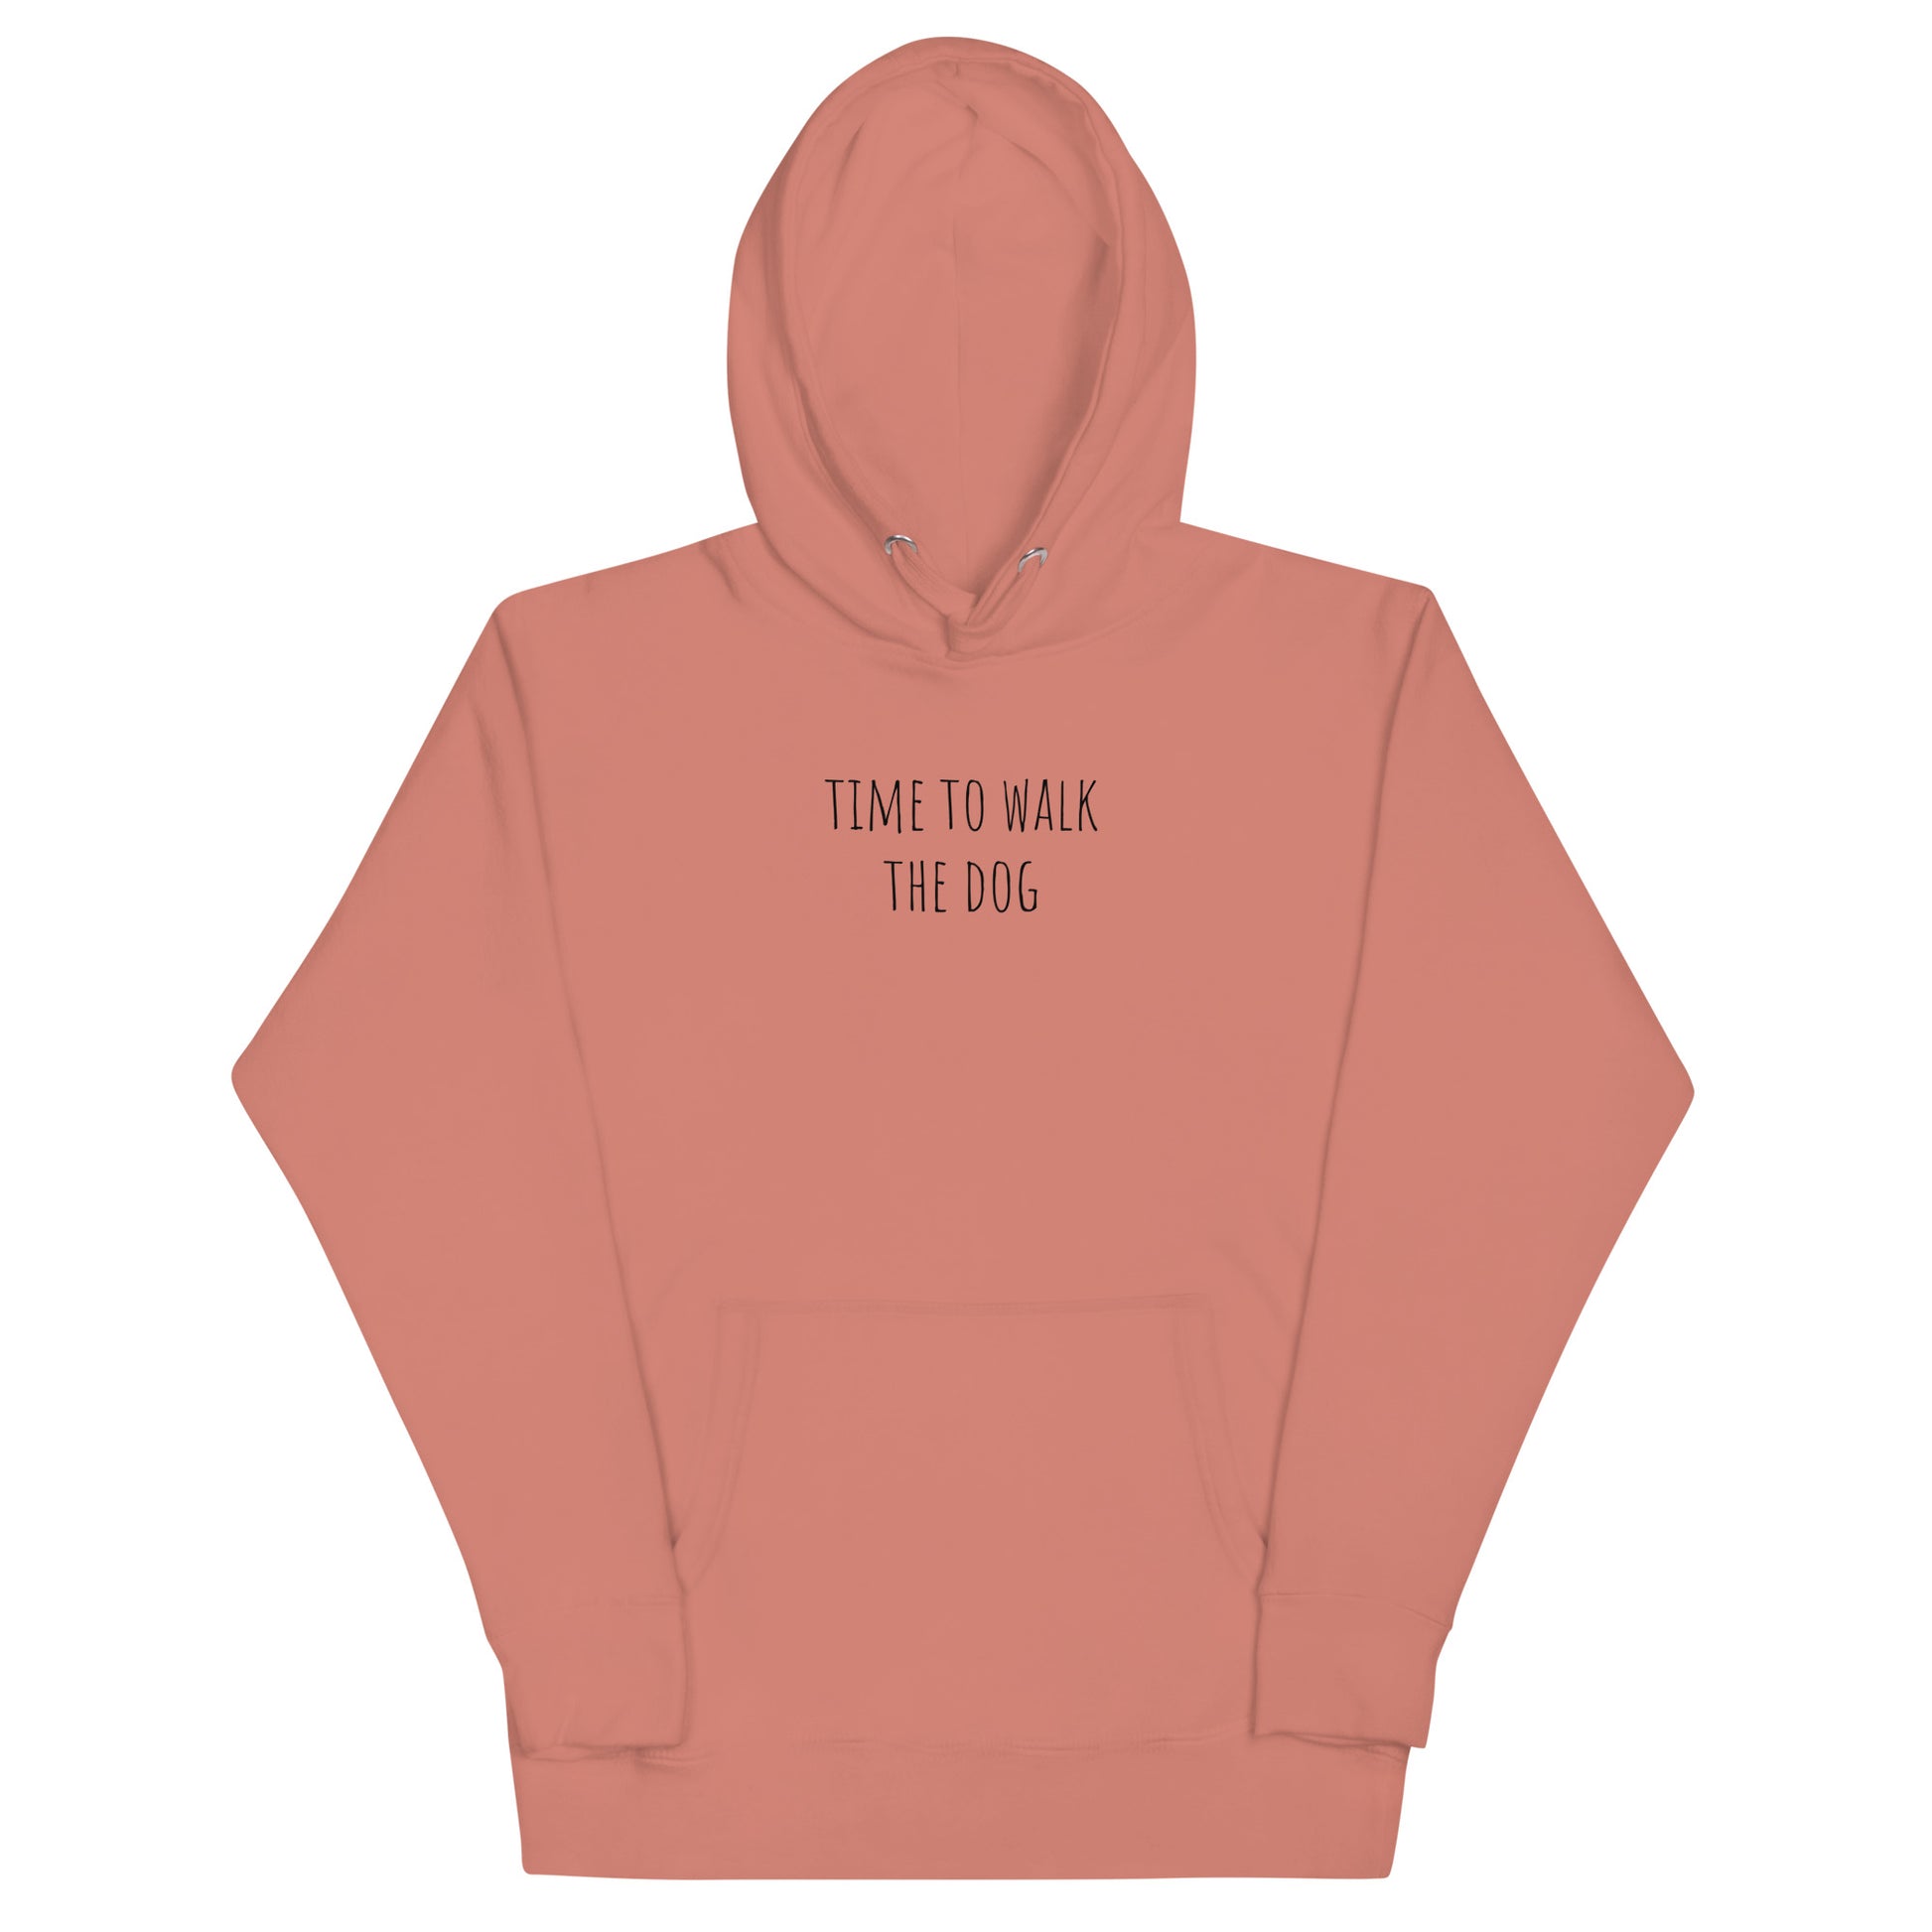 Time to walk the dog German Shepherd lover hoodie pink color - GSD Colony